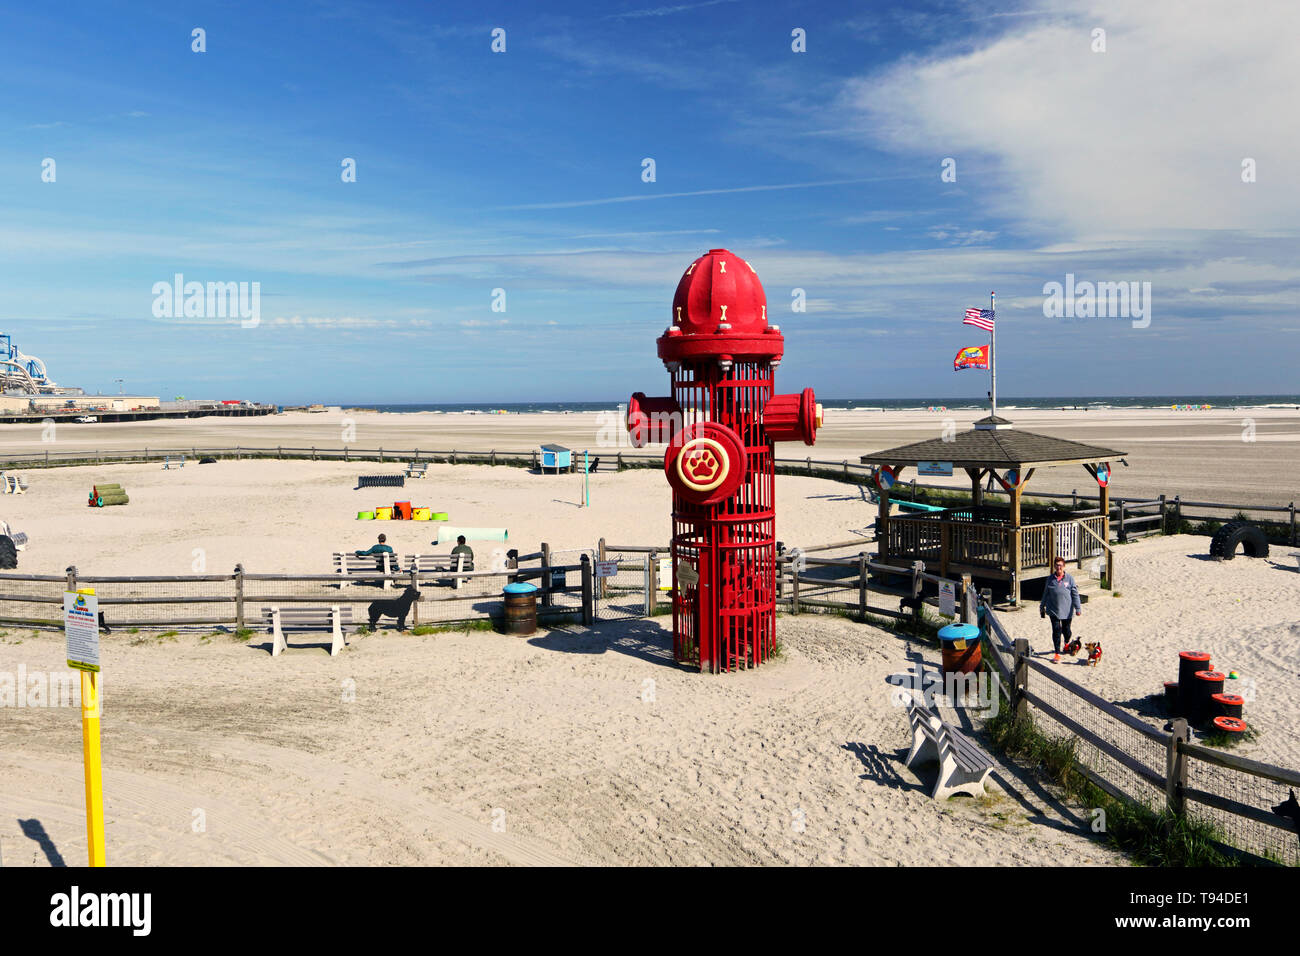 A Dog Park on the beach in Wildwood, New Jersey, USA Stock Photo